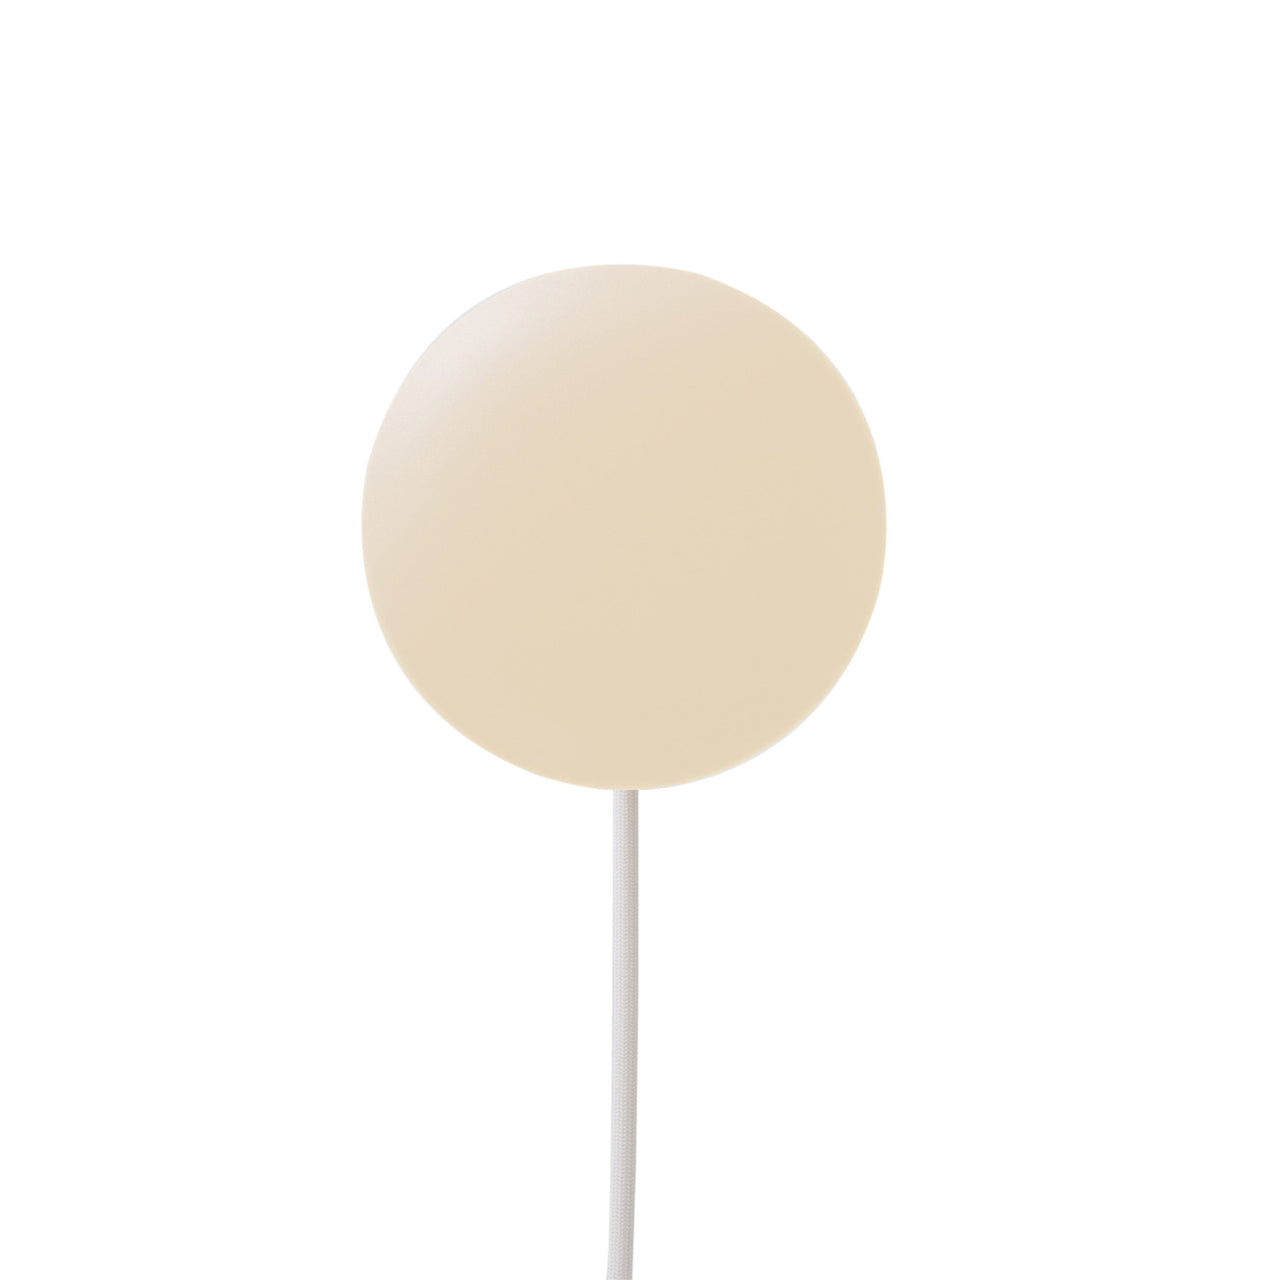 Parc 01 Table Lamp: Footswitch + White